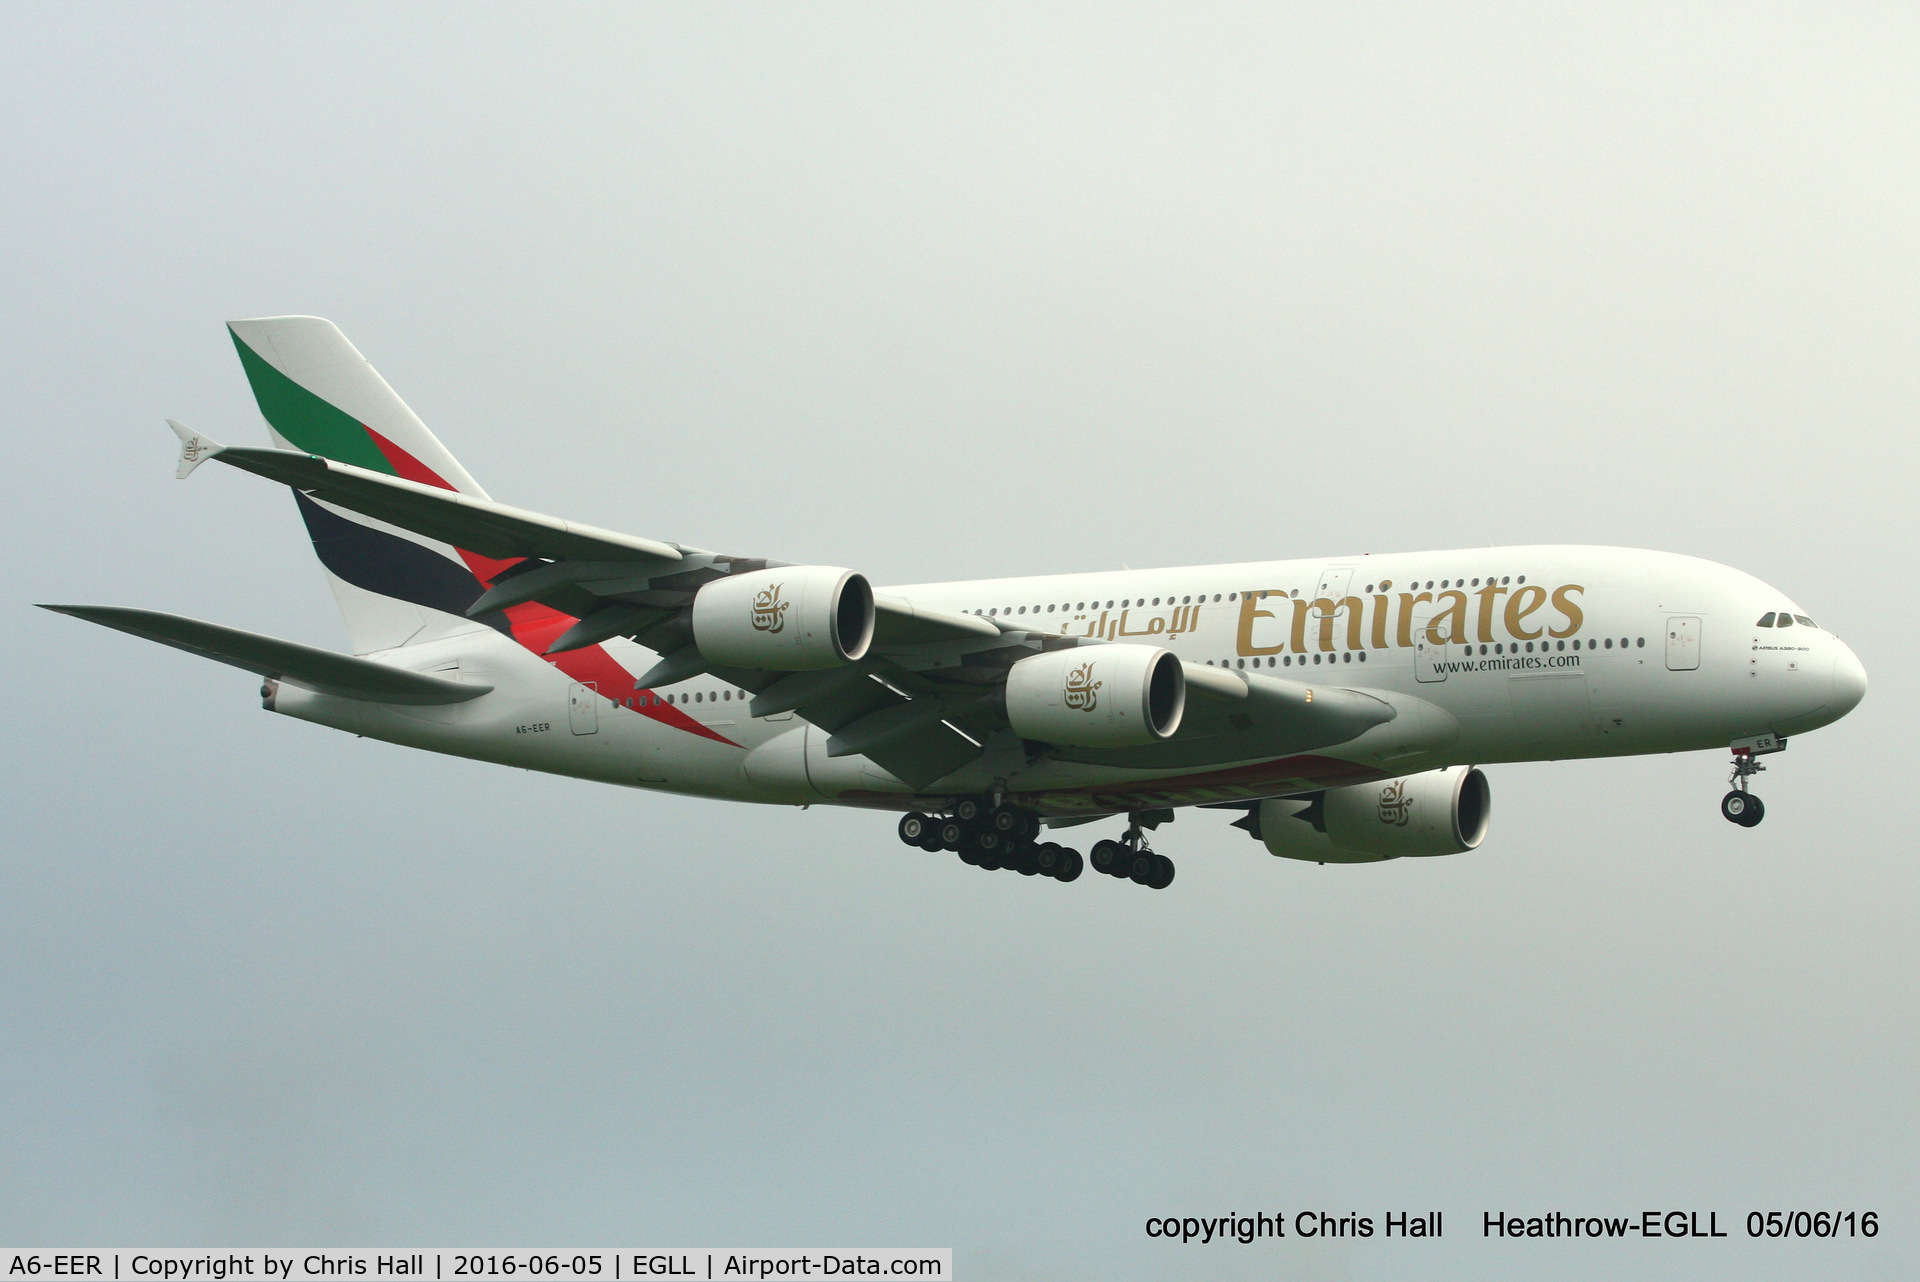 A6-EER, 2013 Airbus A380-861 C/N 139, Emirates